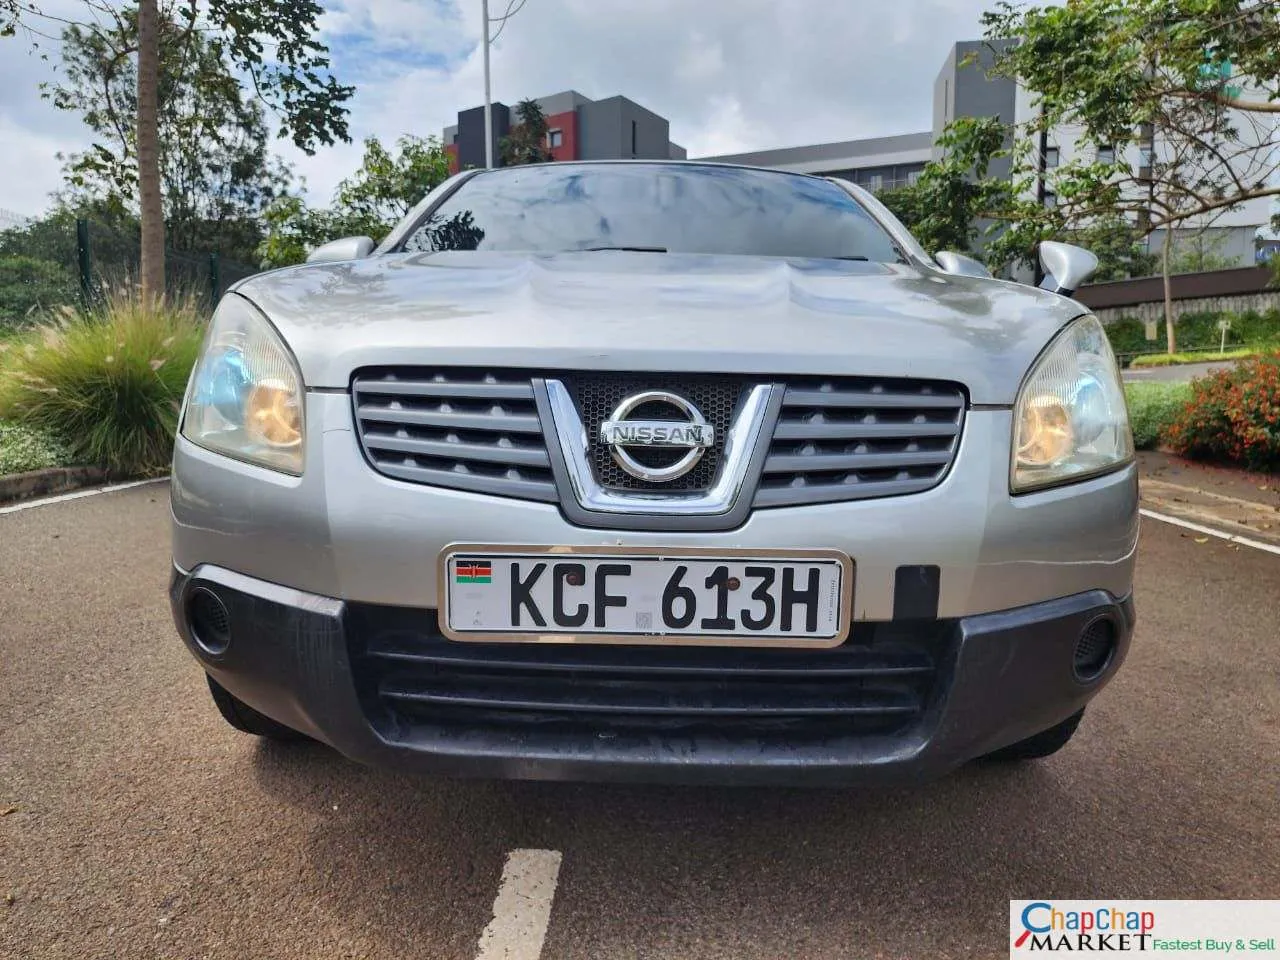 Nissan Dualis for sale in Kenya with SUNROOF 🔥 SALE Pay 30% Deposit Trade in Ok EXCLUSIVE Hire purchase installments